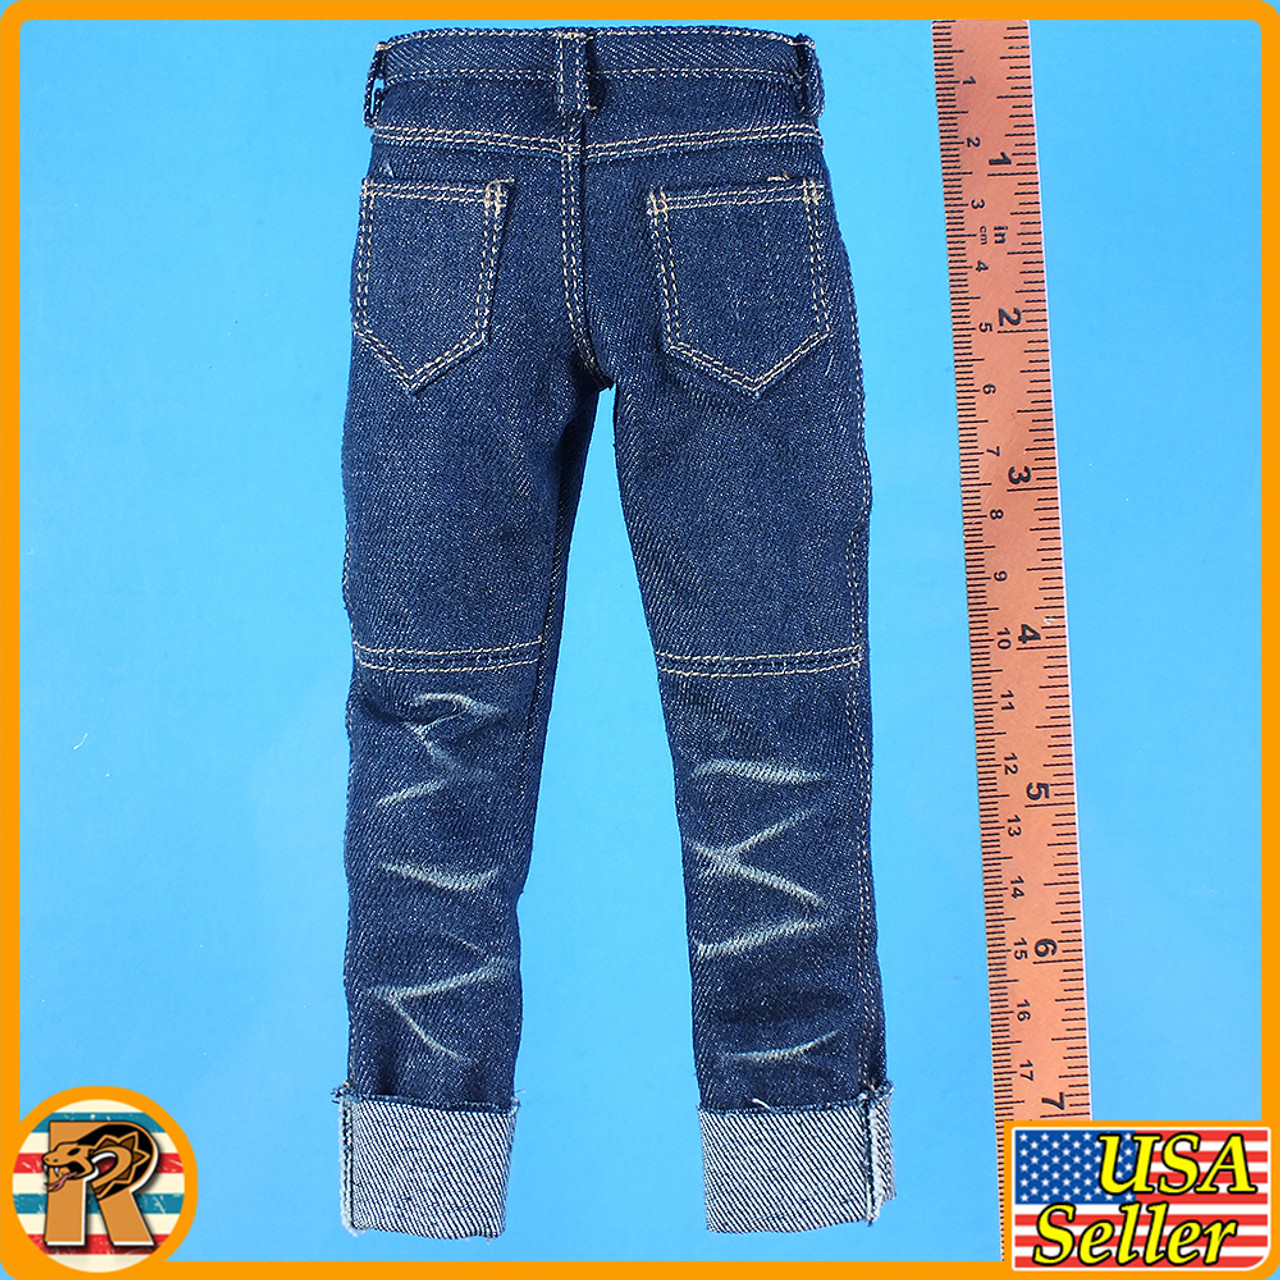 GK Hearts 6 Augustine - Blue Jeans Pants - 1/6 Scale